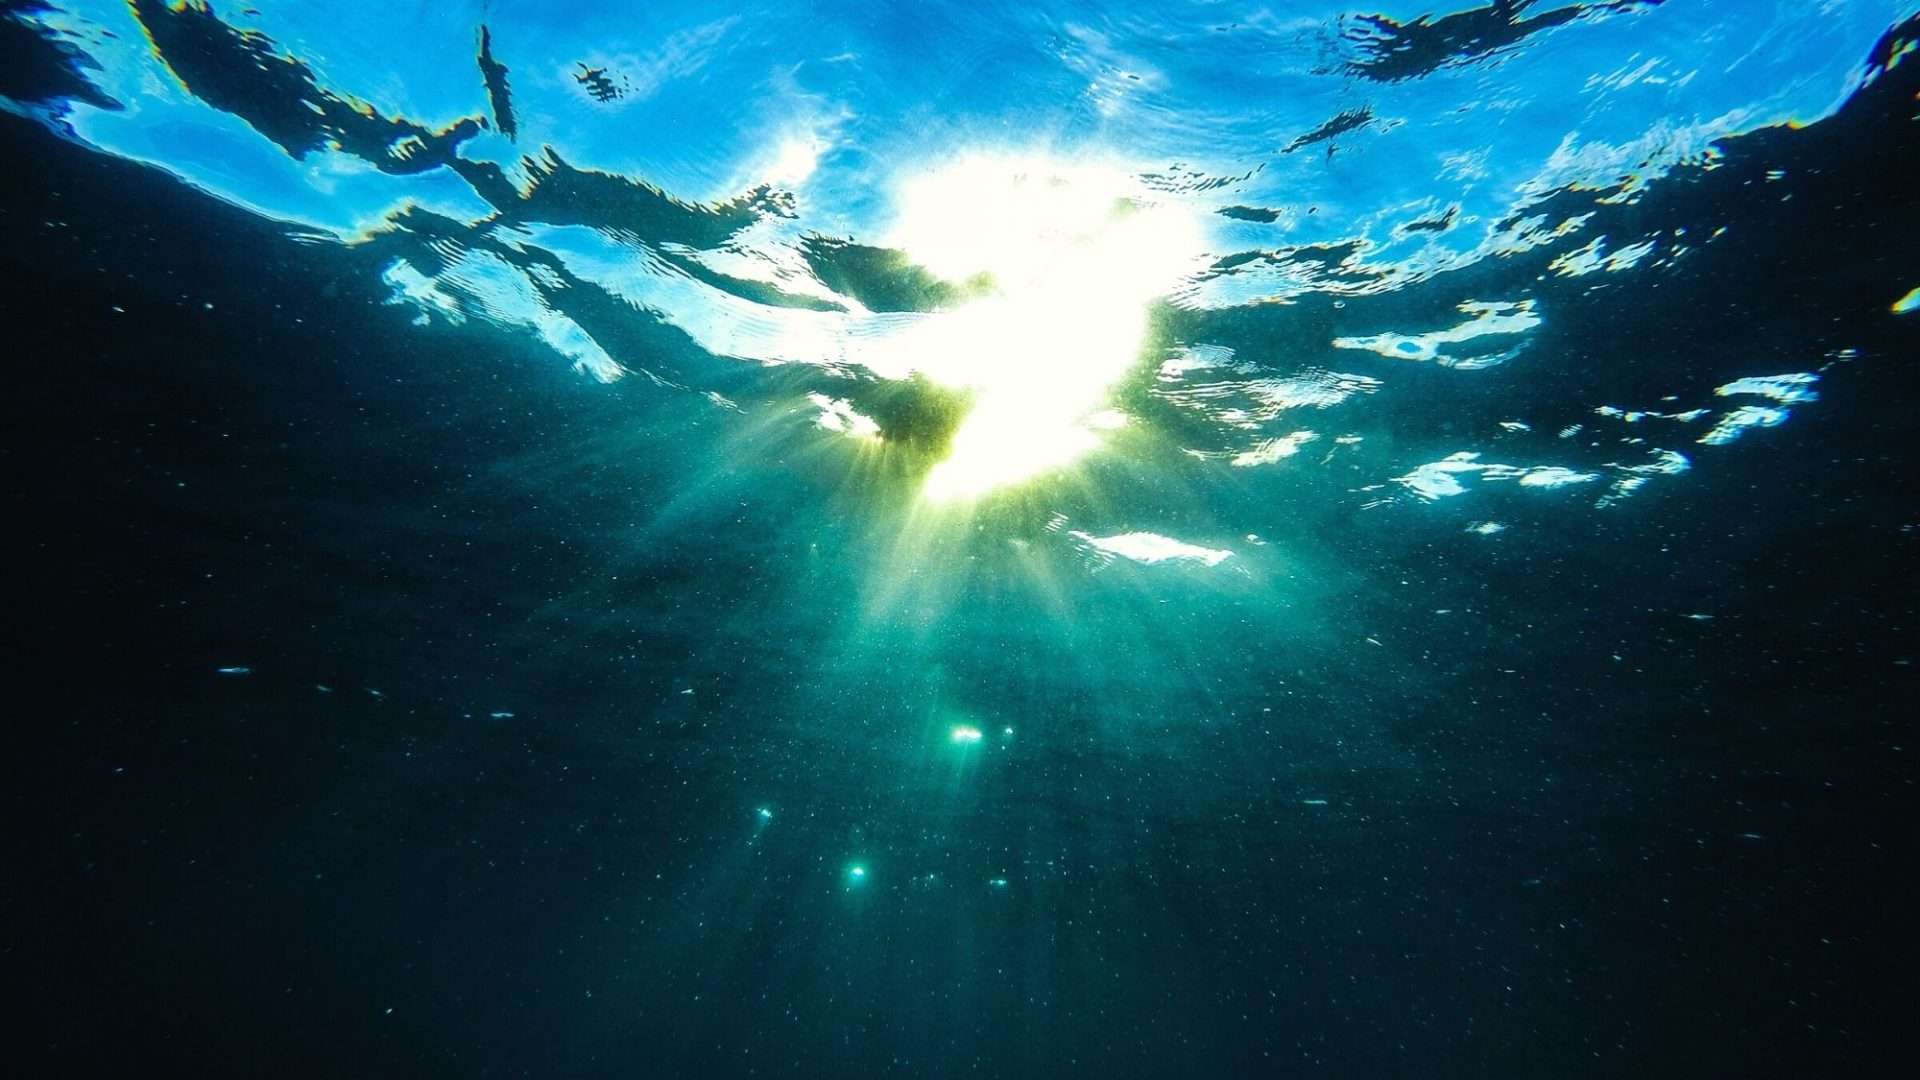 View from underwater looking up at the sun